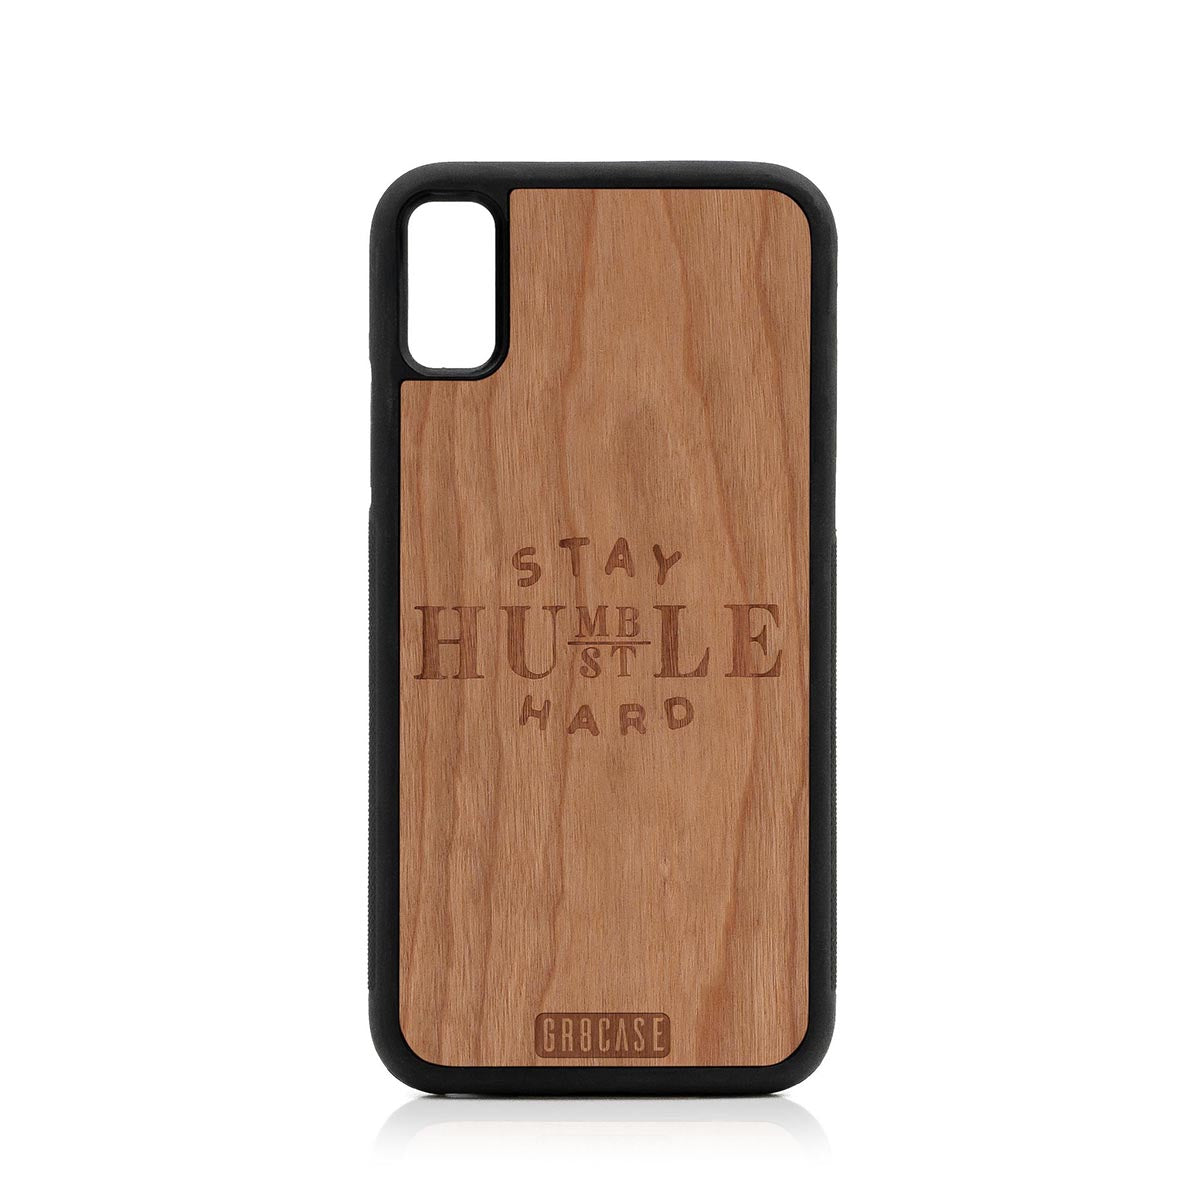 Stay Humble Hustle Hard Design Wood Case For iPhone XR by GR8CASE